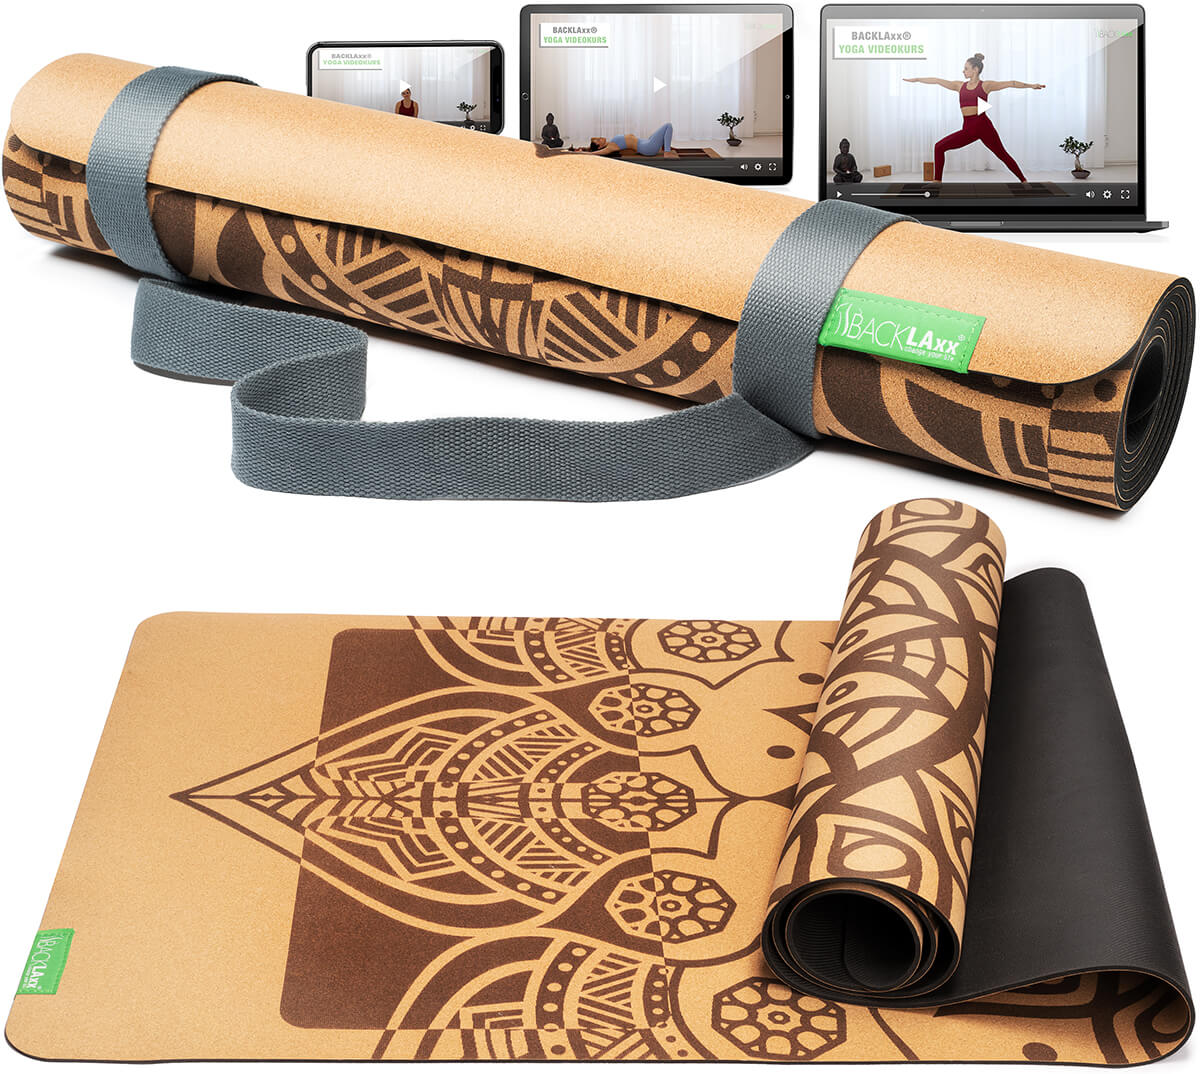 Yoga mat (incl. free video course)